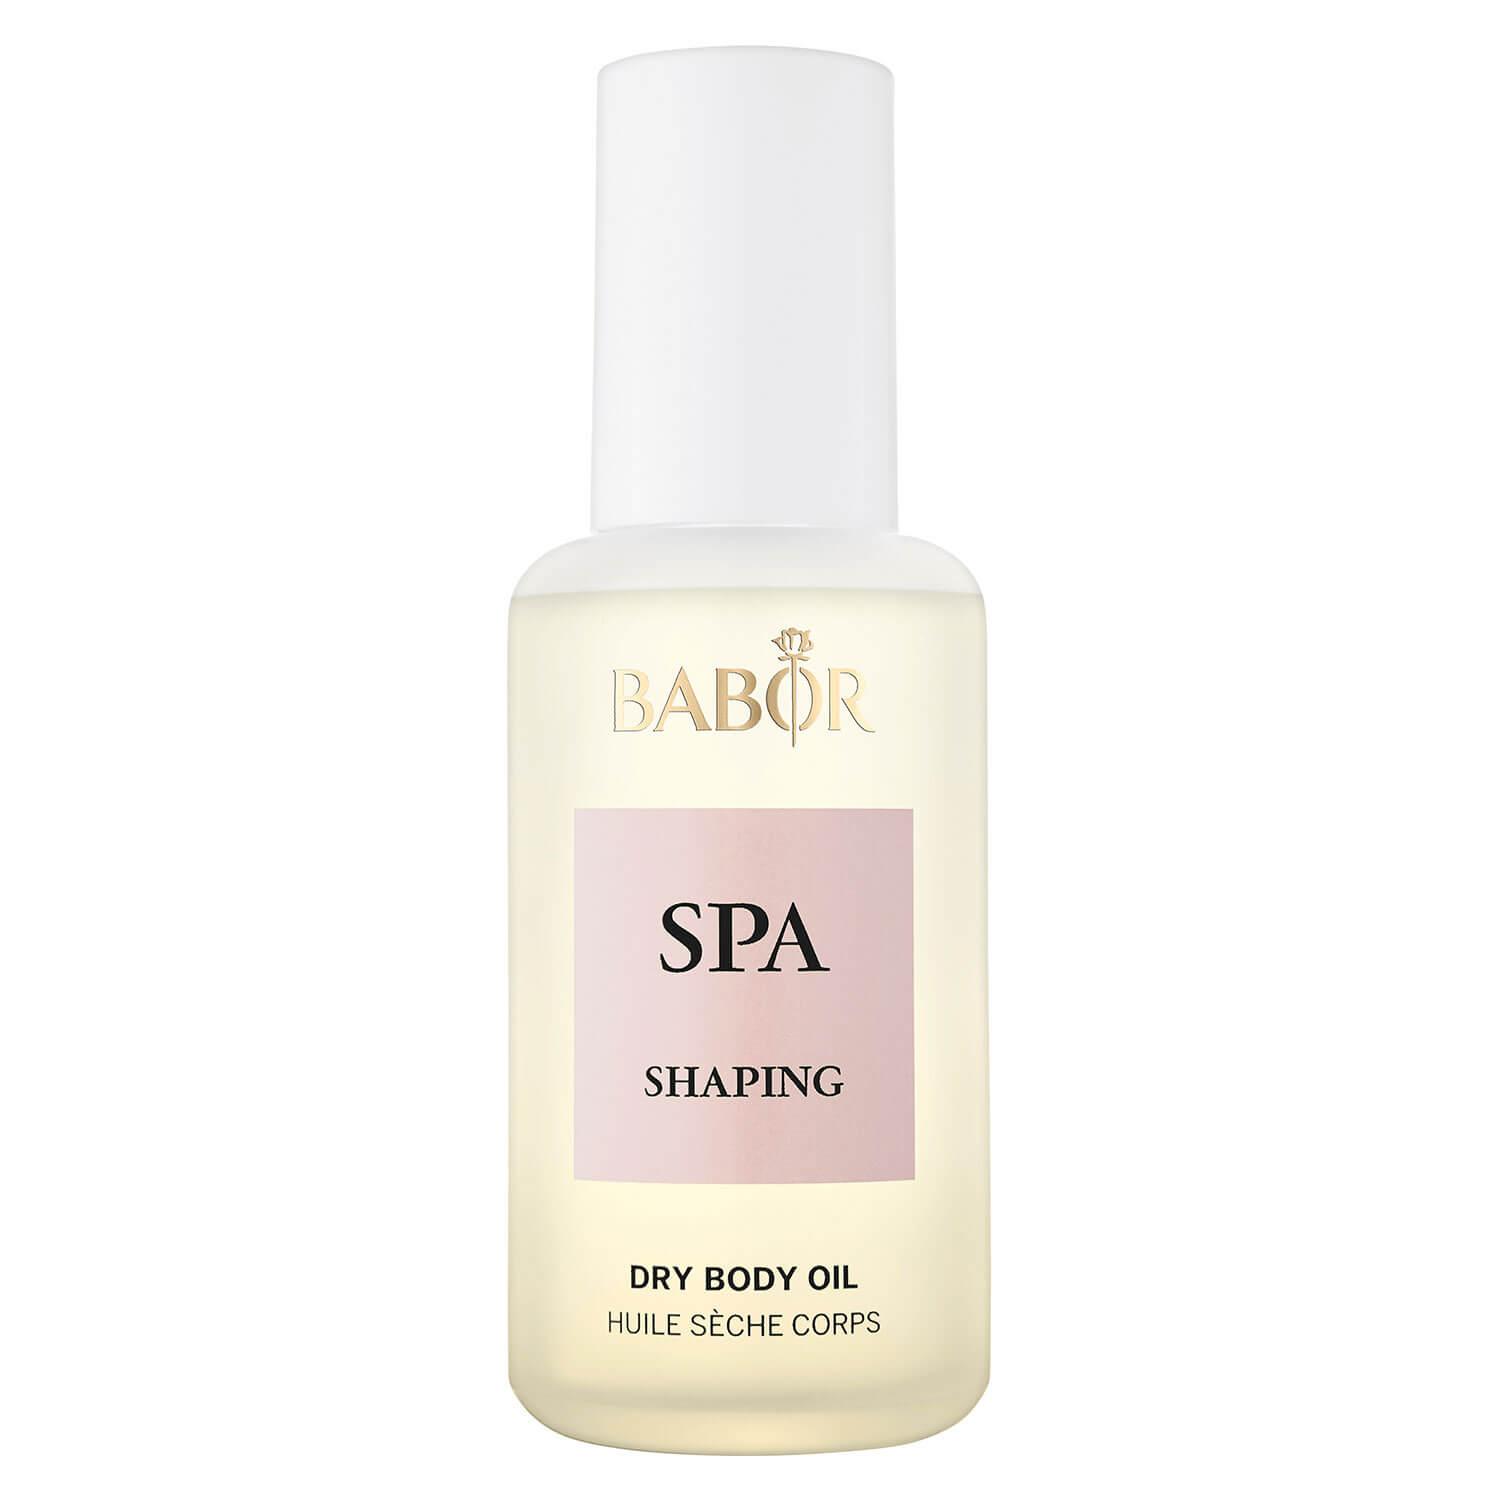 BABOR SPA - Shaping Dry Body Oil